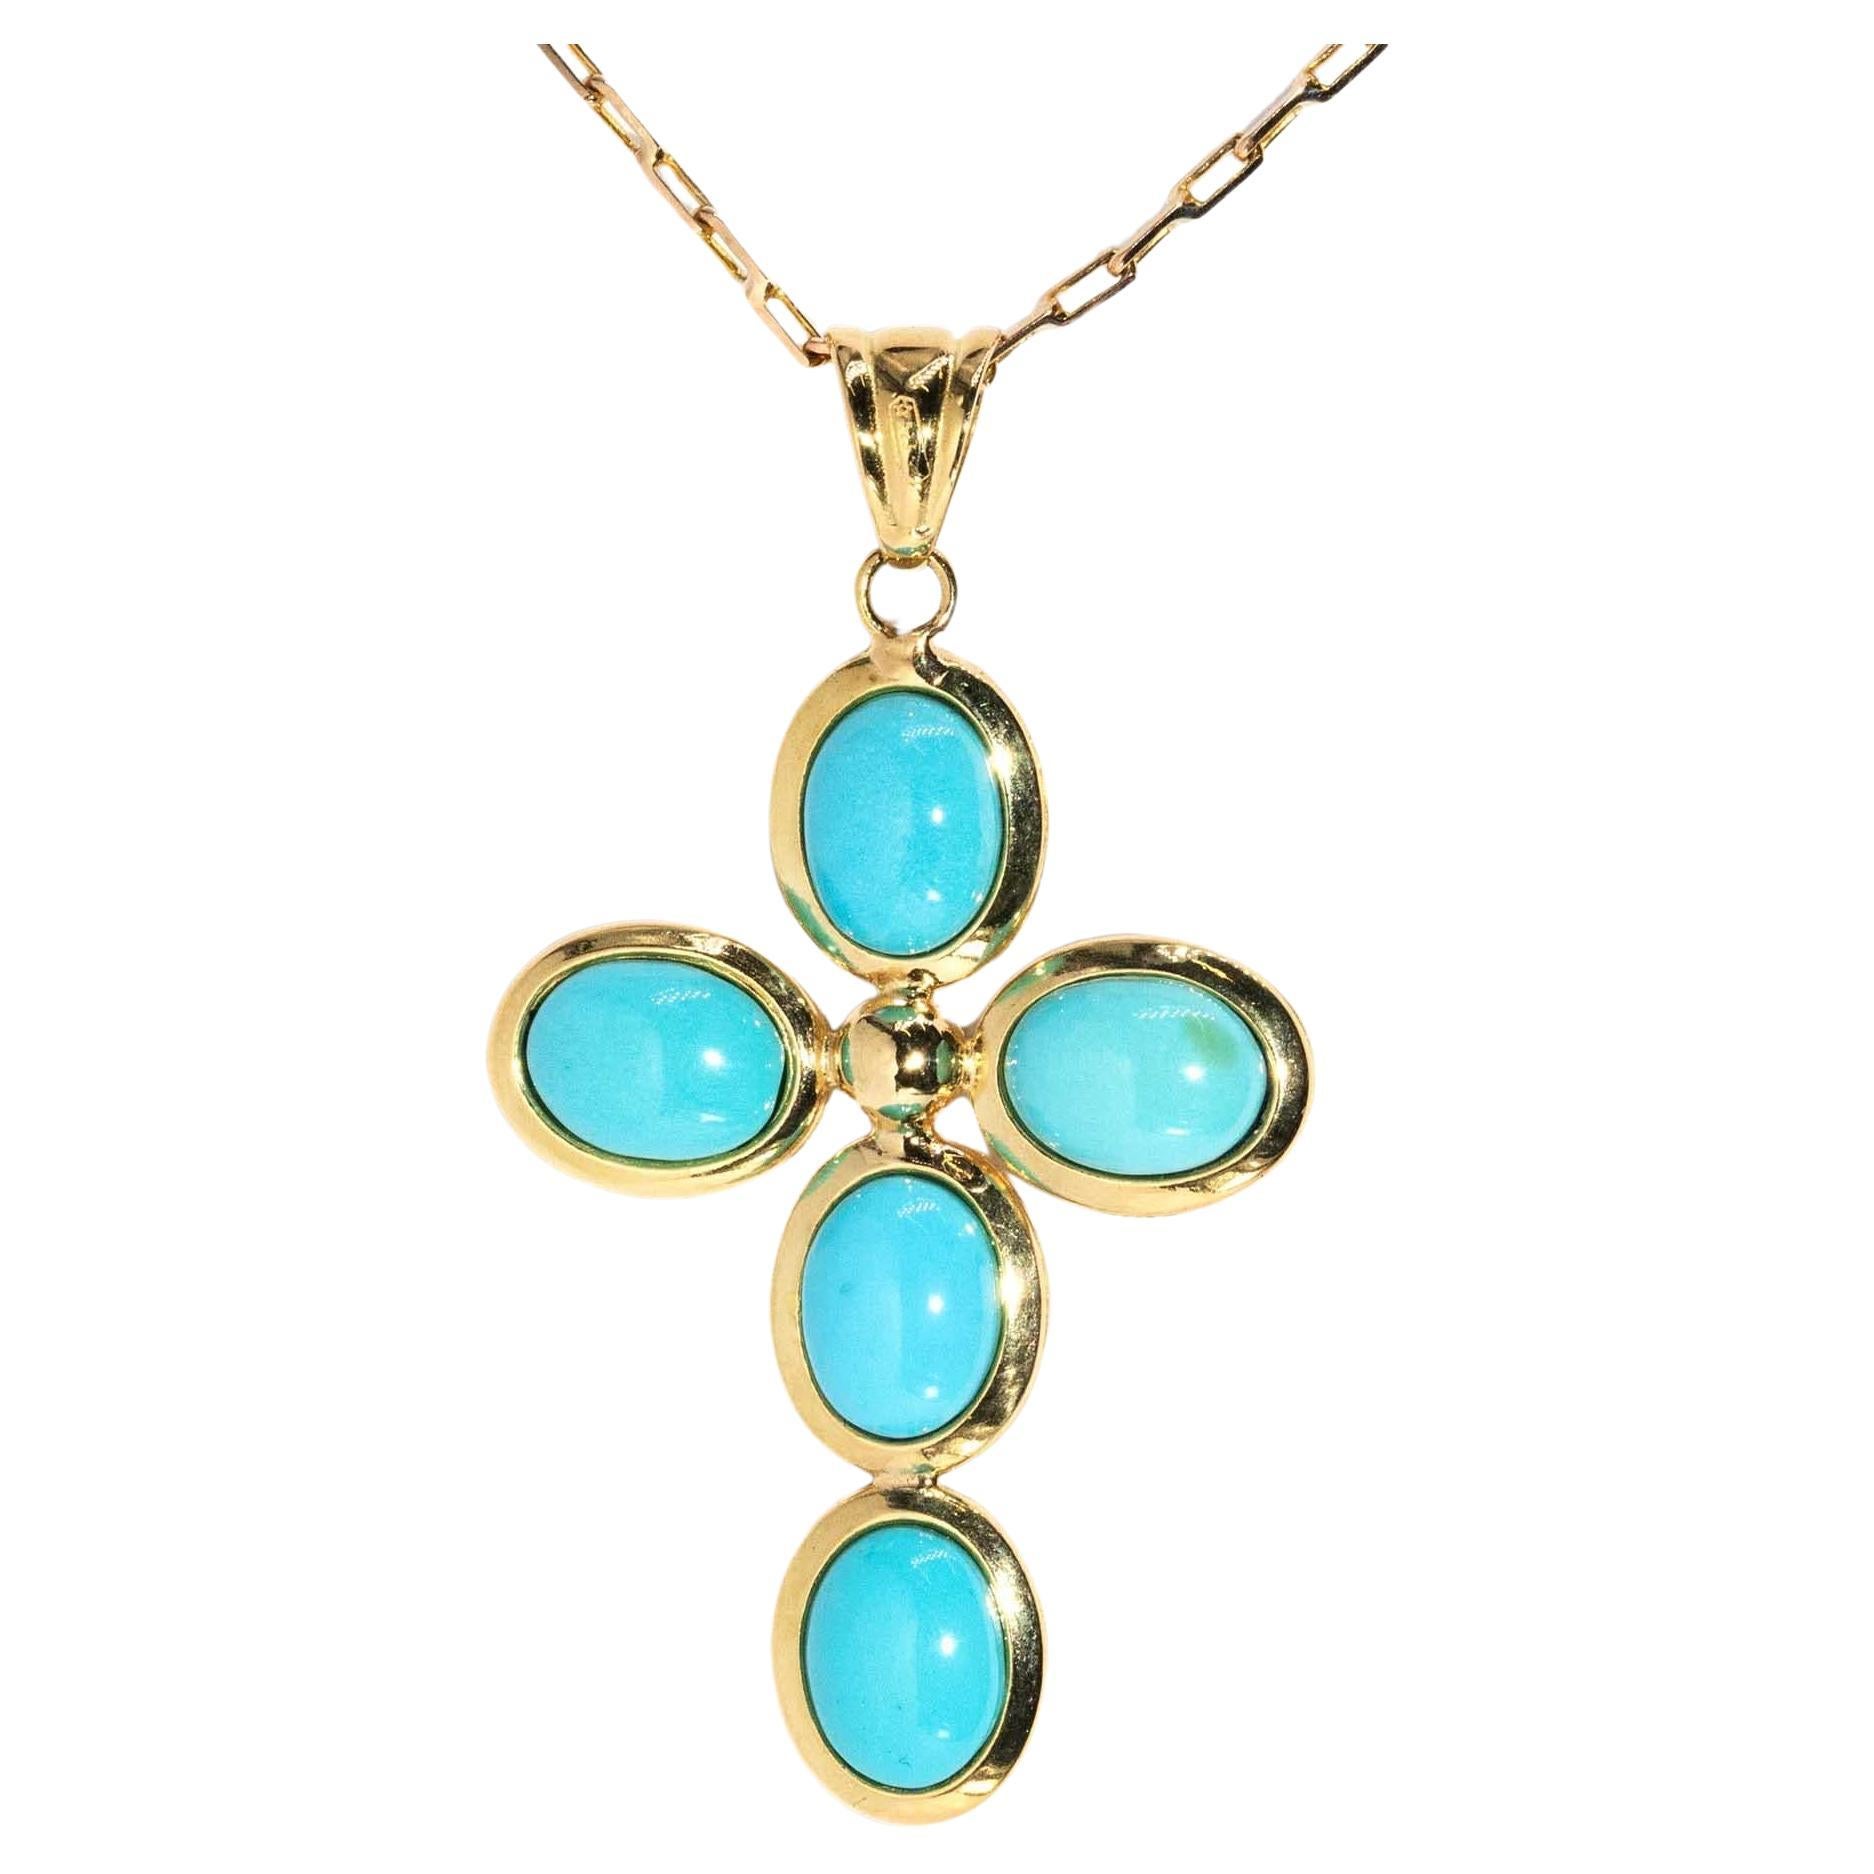 Vintage Circa 1990s Turquoise Cabochon Pendant & Chain 14 Carat Yellow Gold For Sale